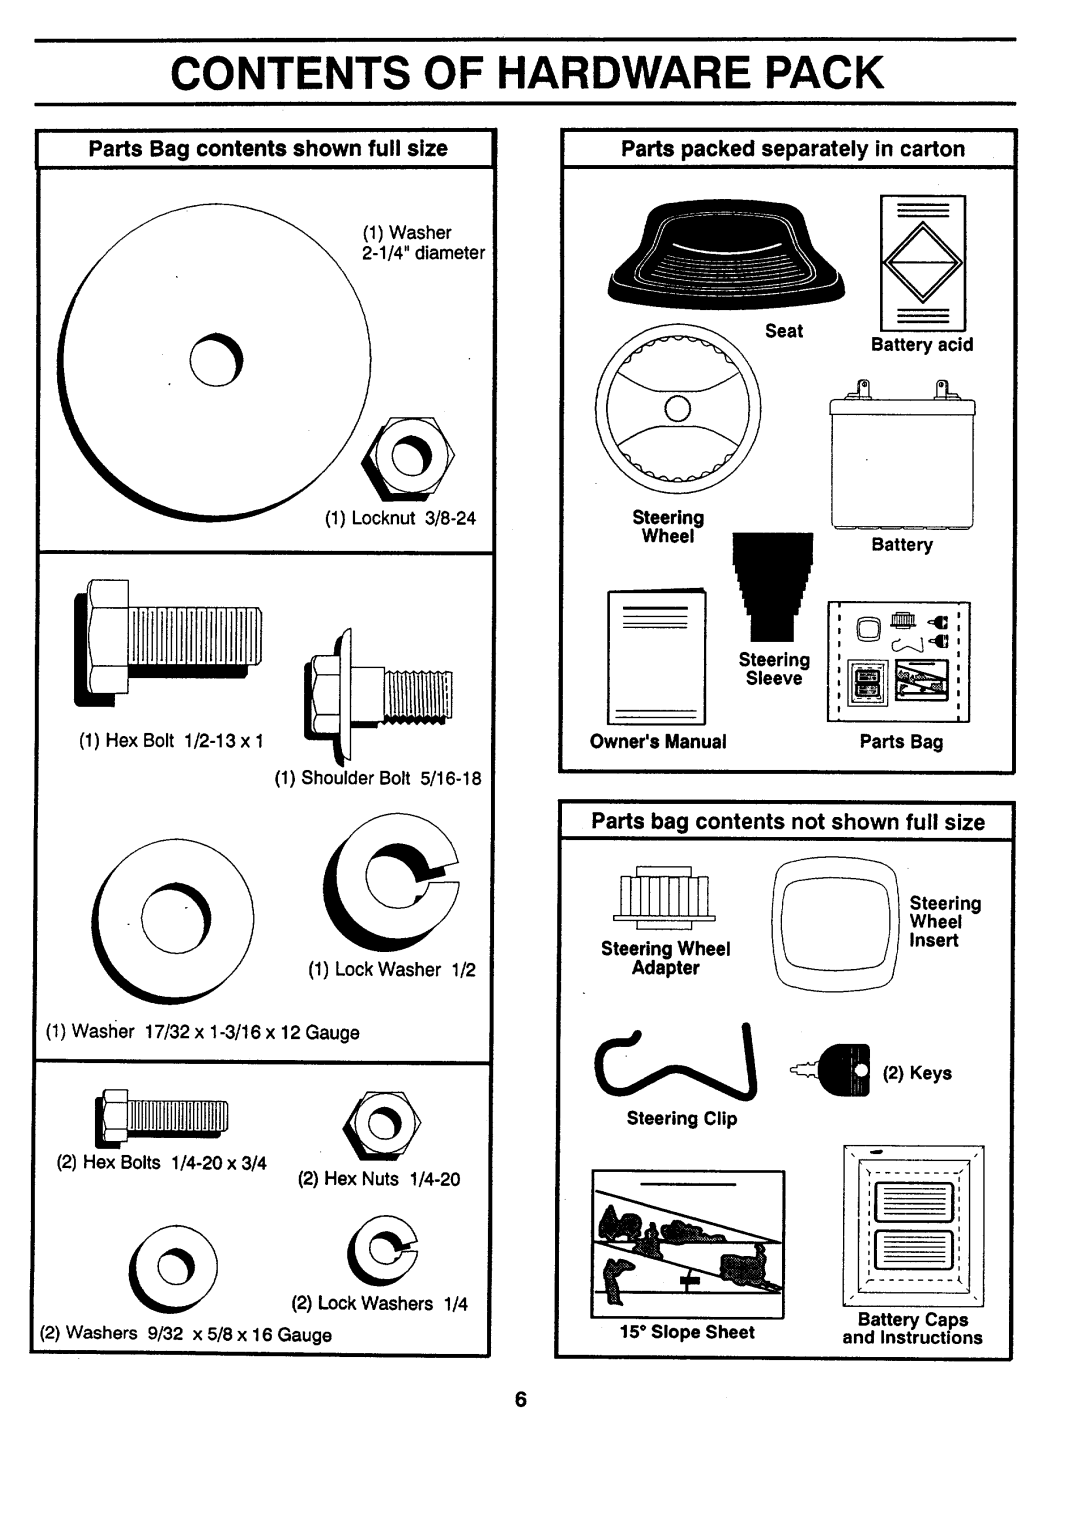 Sears 917.257462 manual Contents Of Hardware Pack, 111II llllllll_, Parts Bag contents shown full size, c-._ 